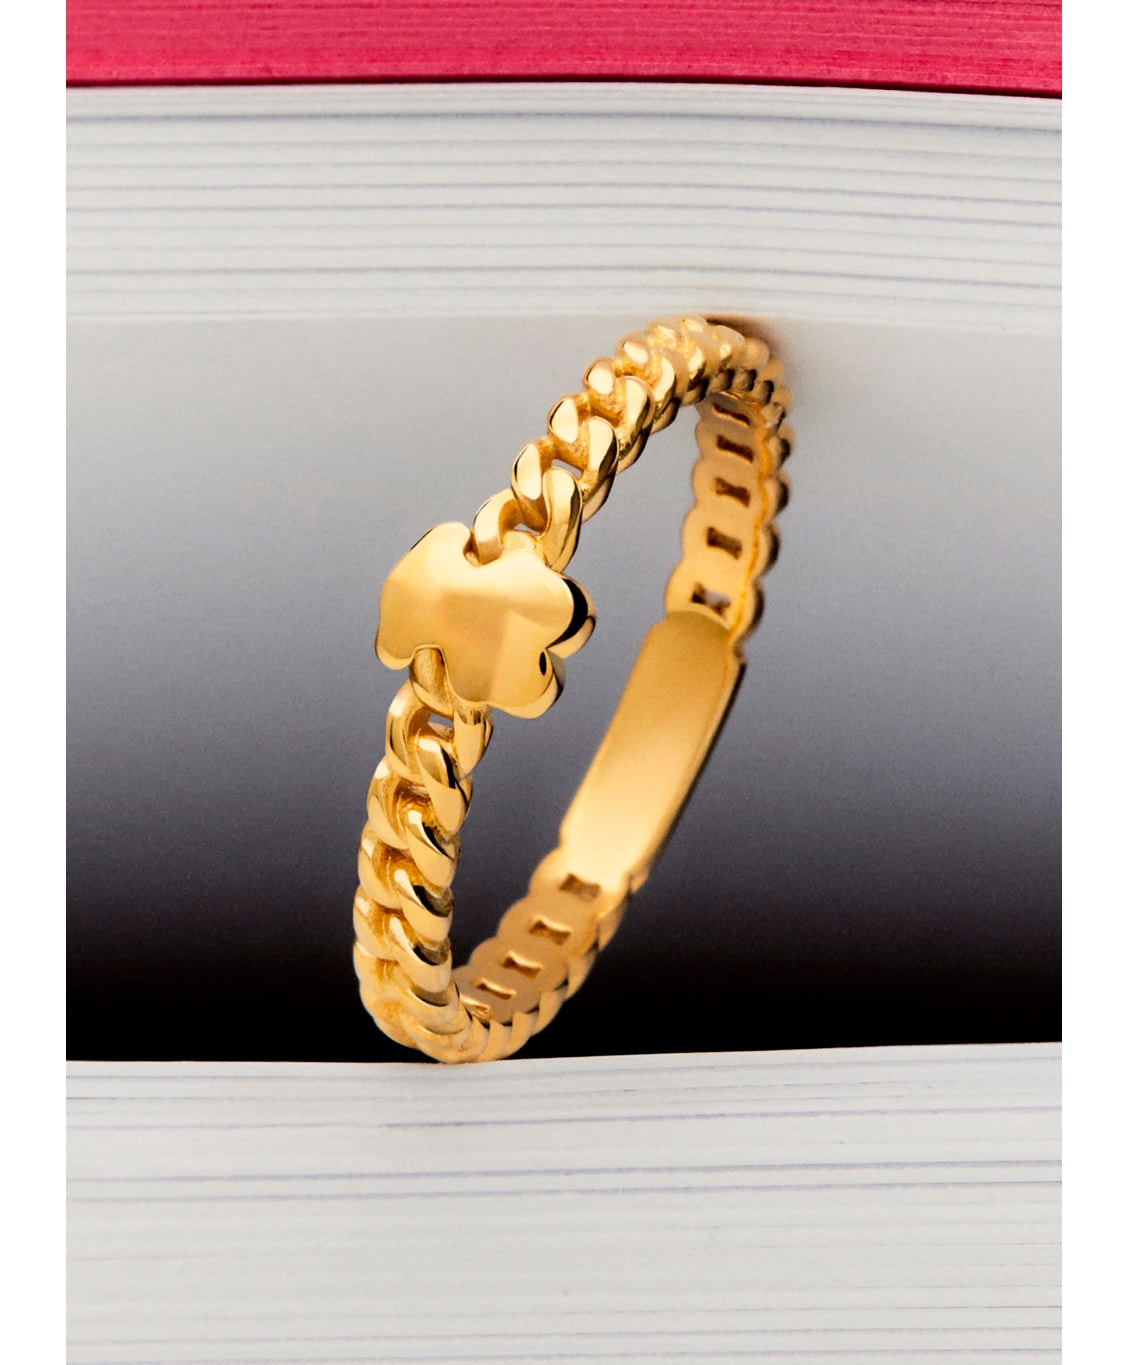 Rings and Band Rings: rings for women, men and girls | TOUS